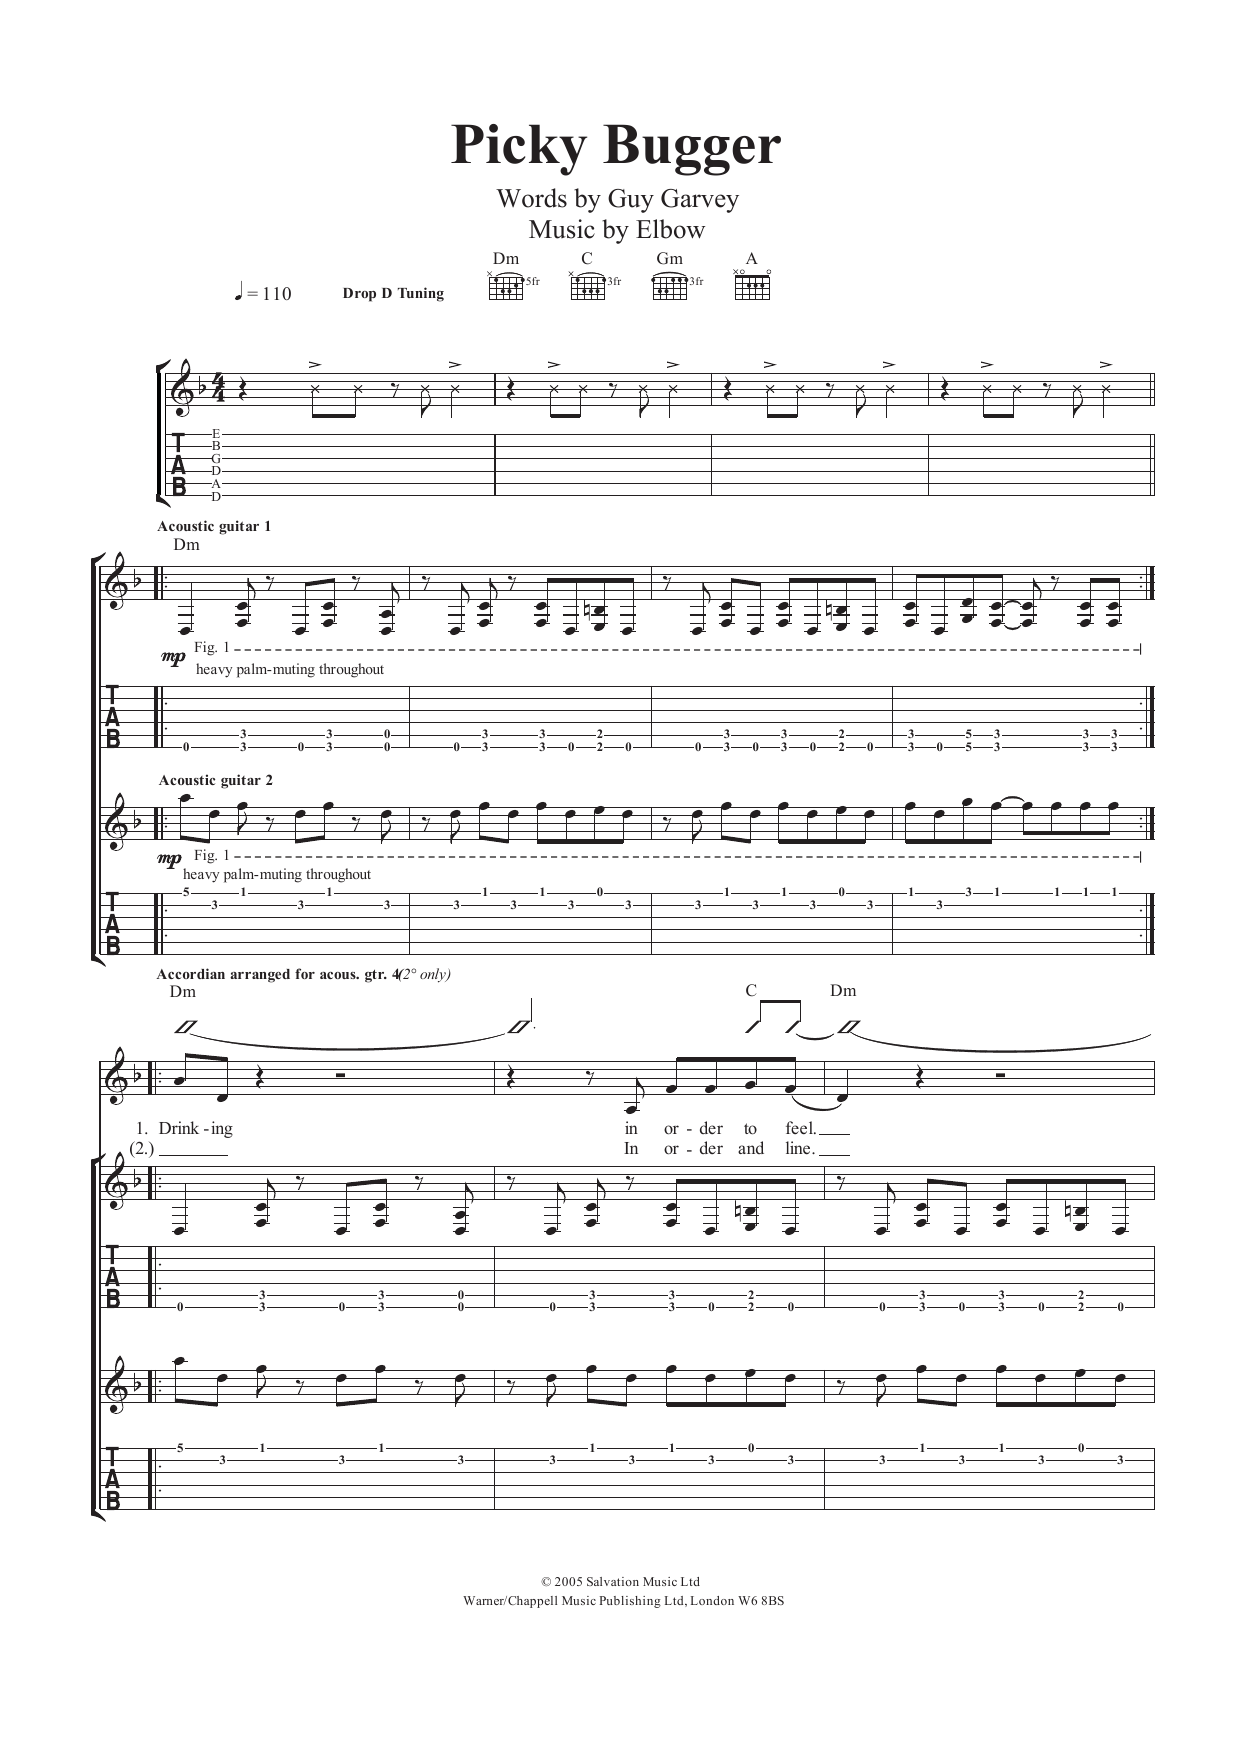 Download Elbow Picky Bugger Sheet Music